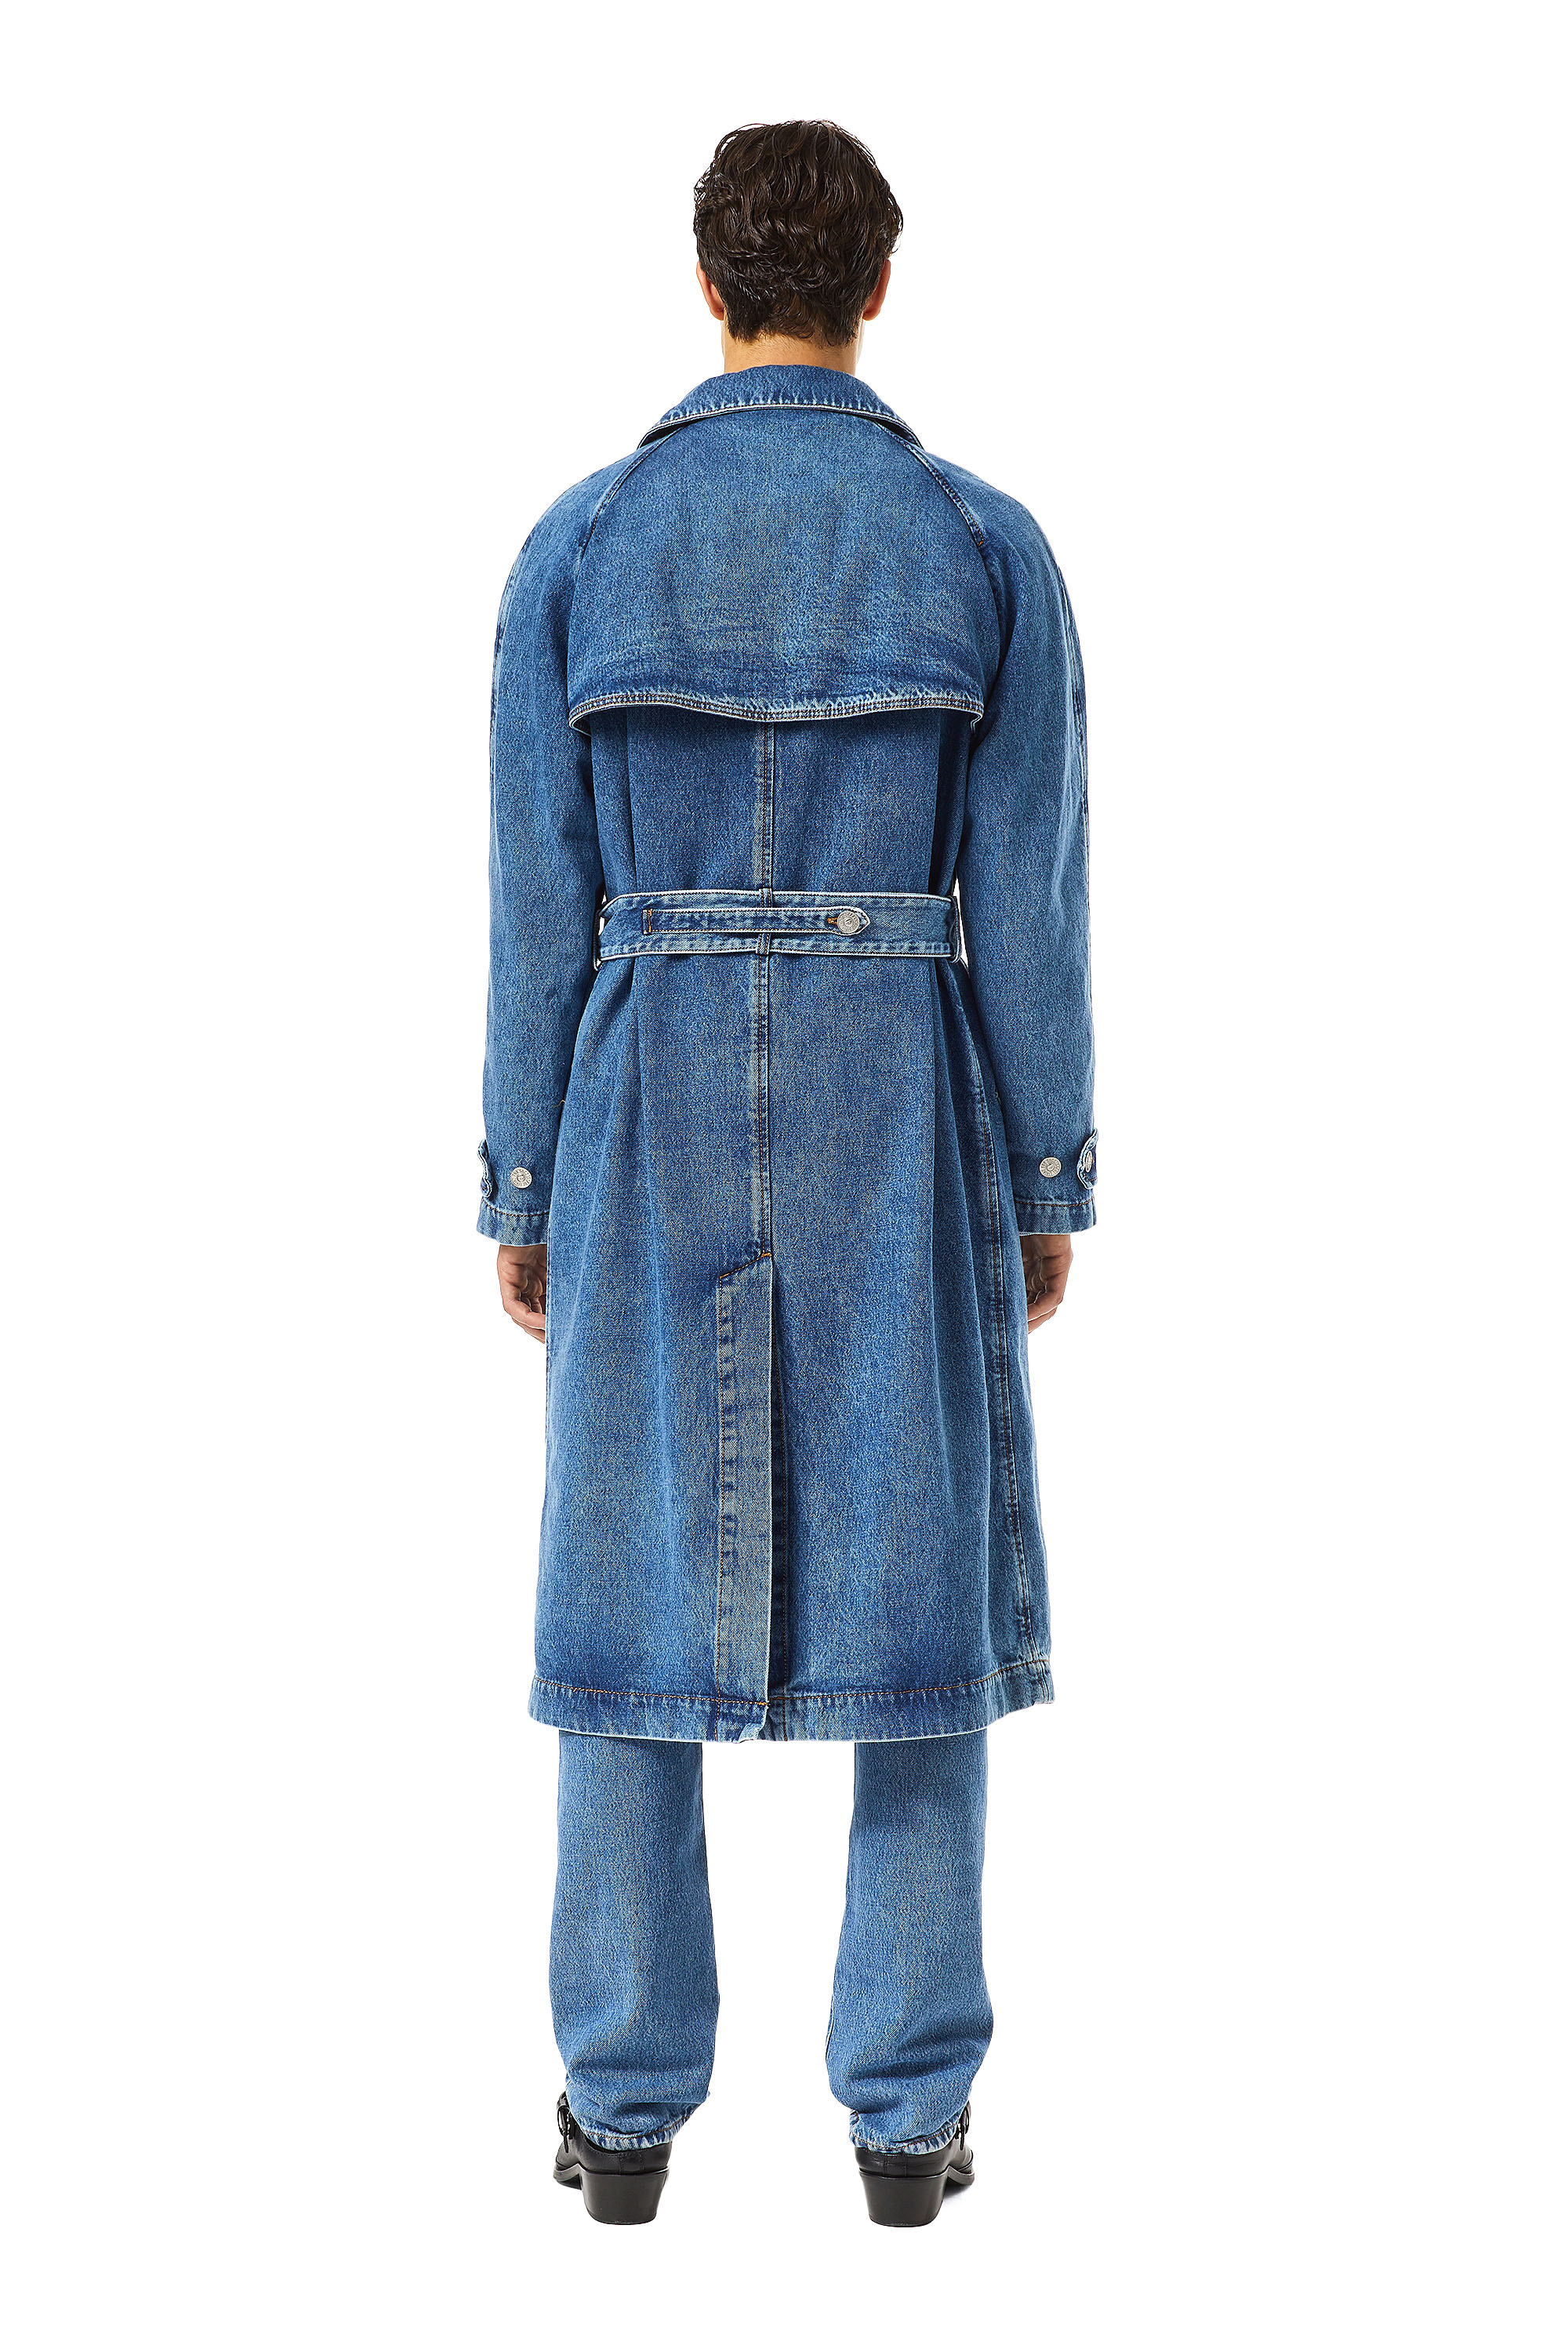 Diesel - D-DELIRIOUS DOUBLE BREASTED TRENCH COAT, Unisex Trench coat in denim in Blue - Image 2